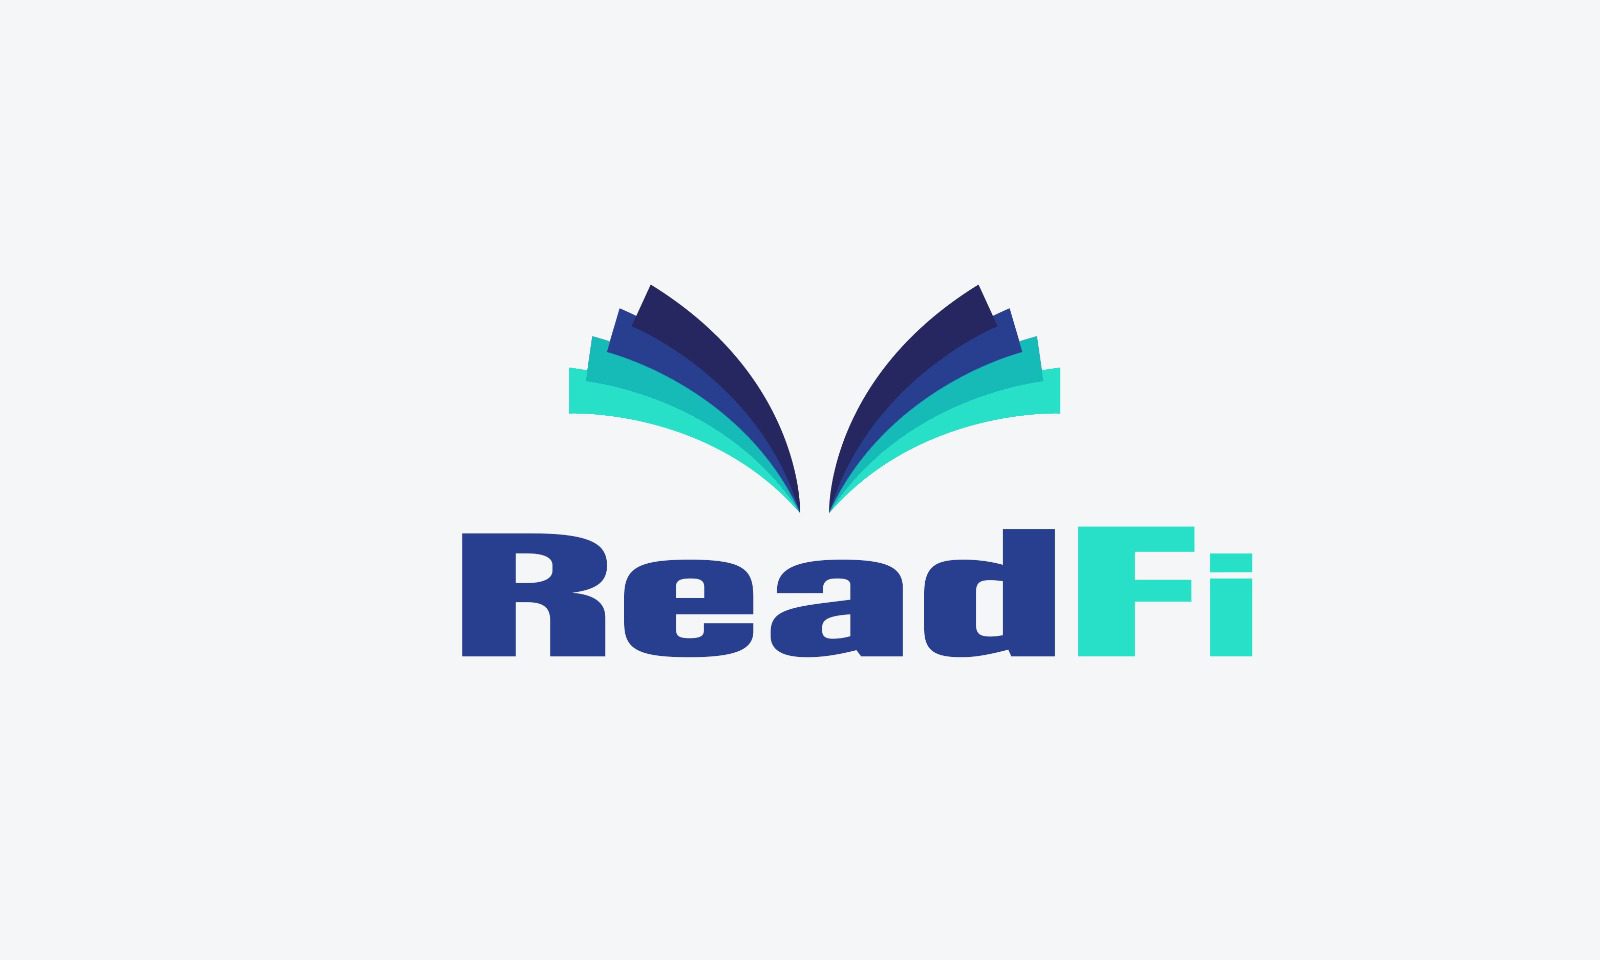 , The ReadFi is an emerging crypto project that offers new services based on blockchain technology.